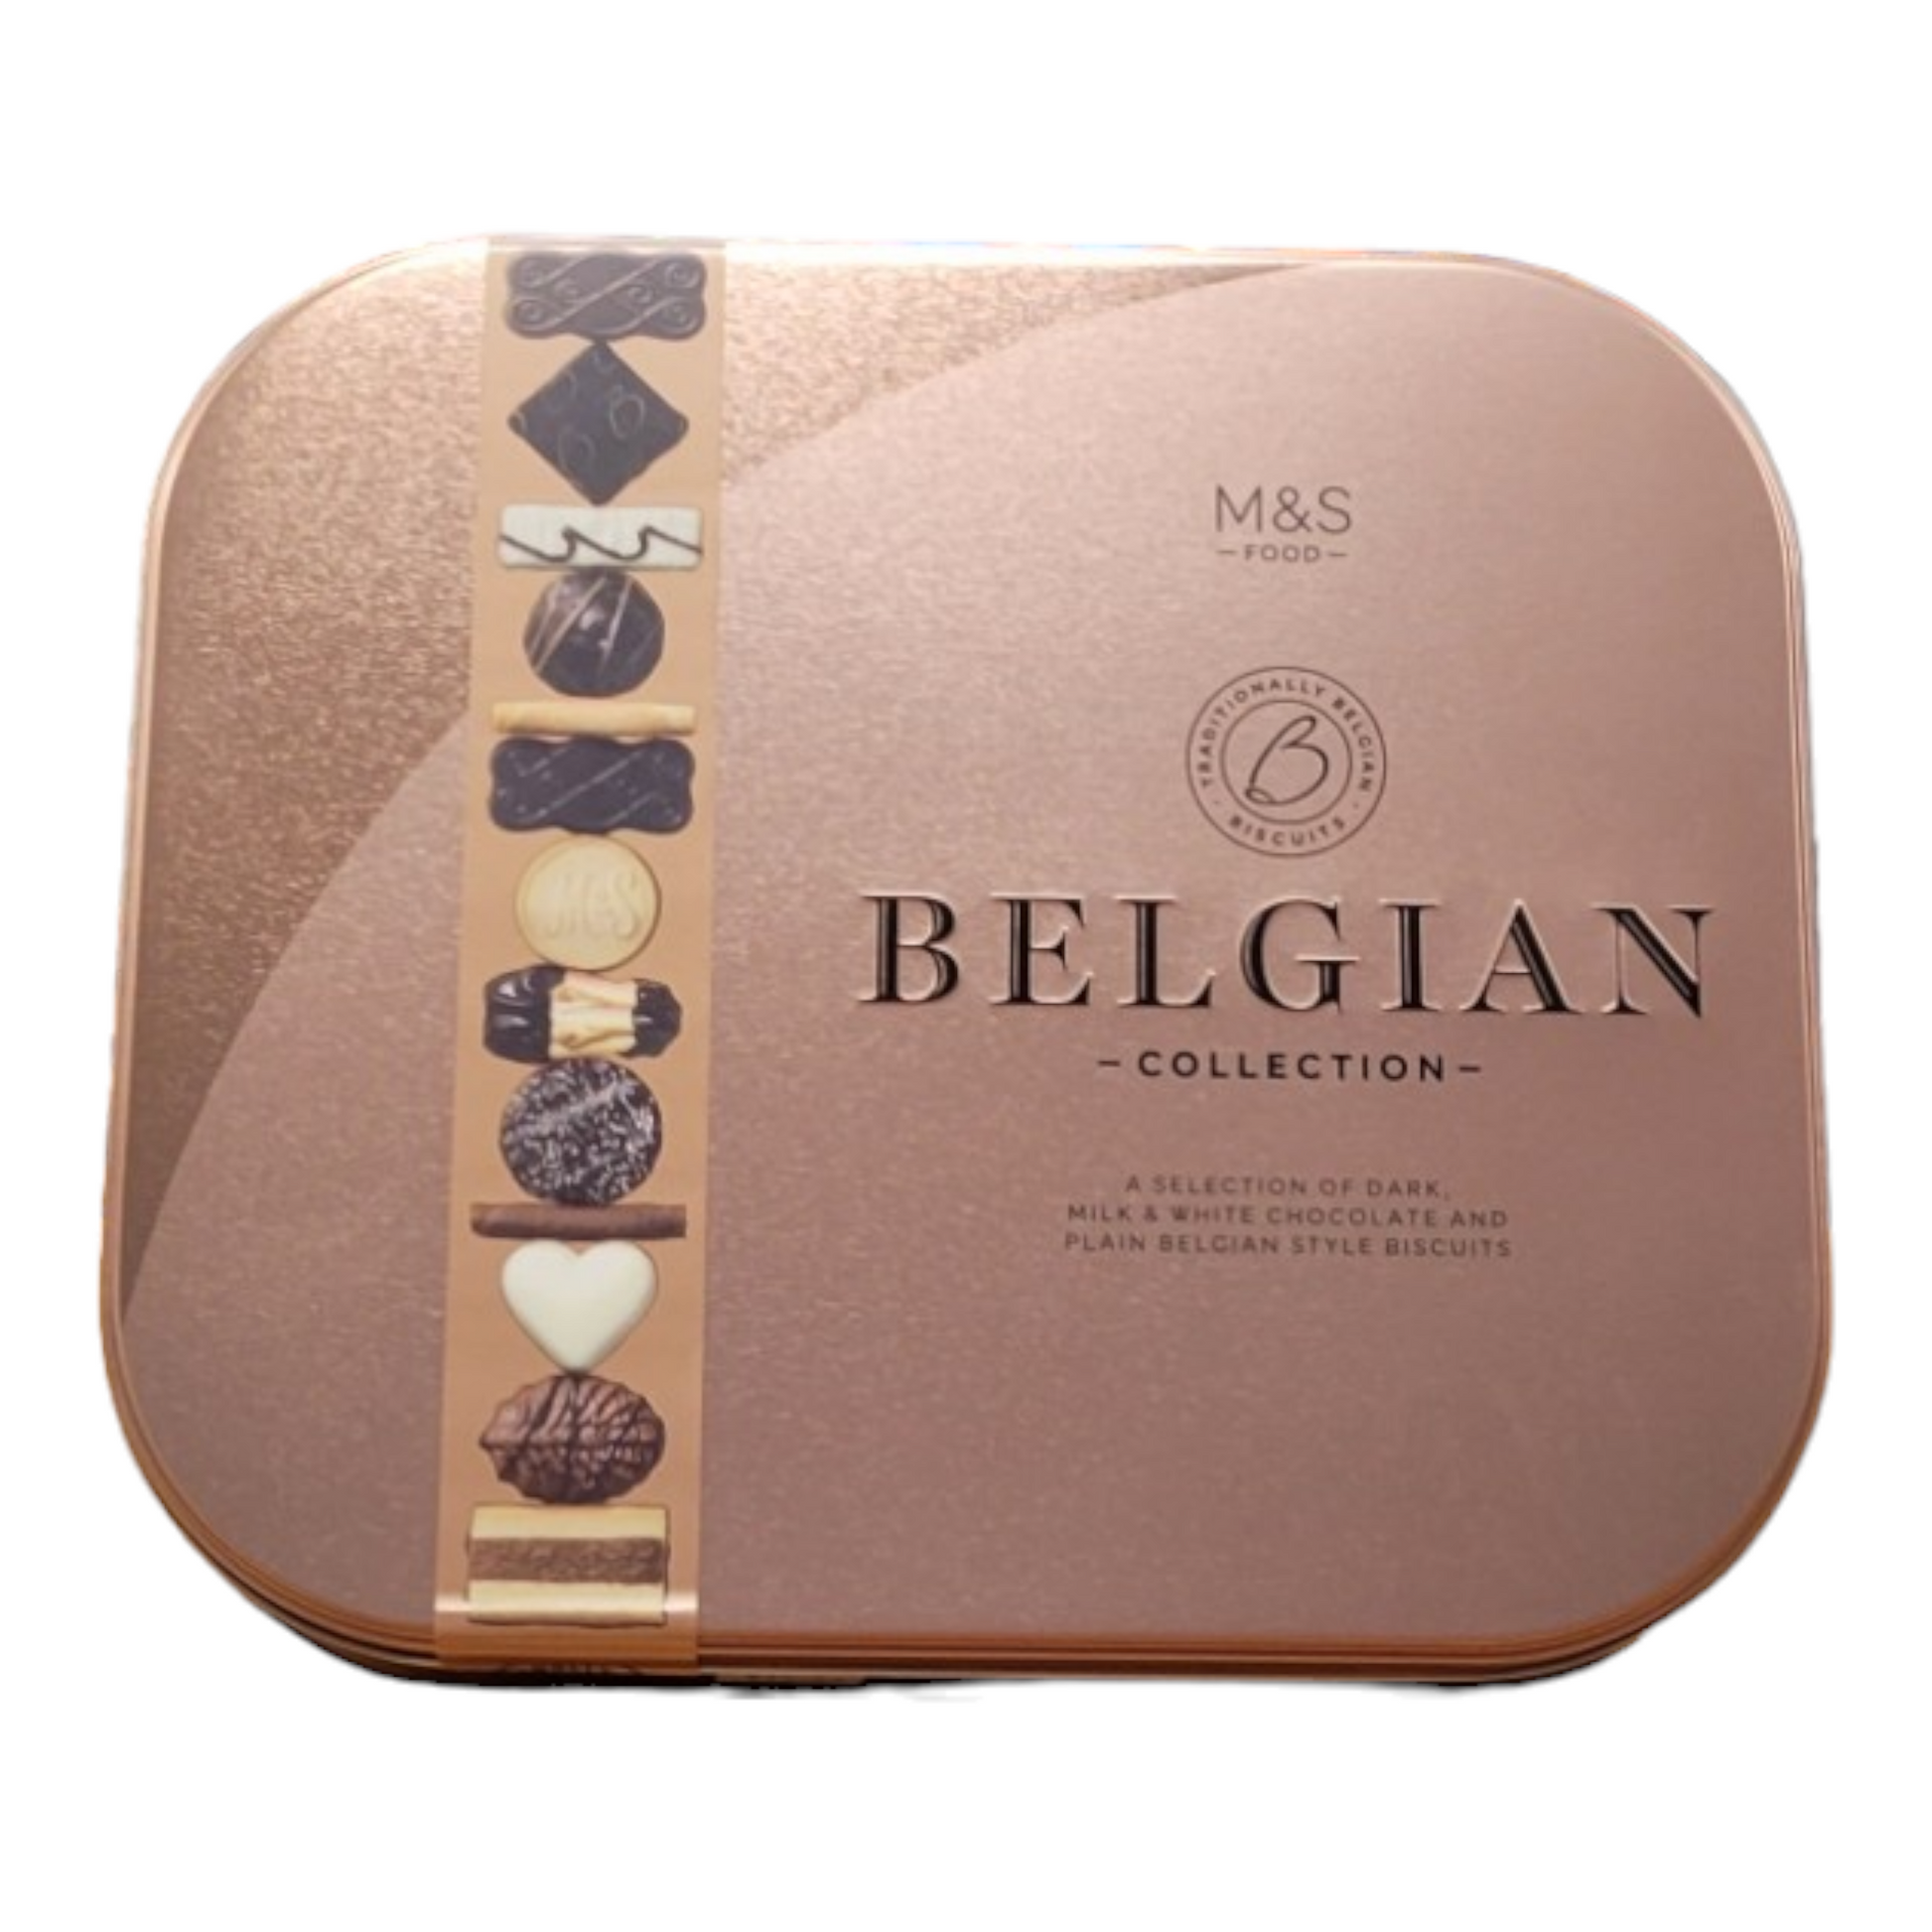  Marks & Spencer / M&S Belgian Collection Biscuits